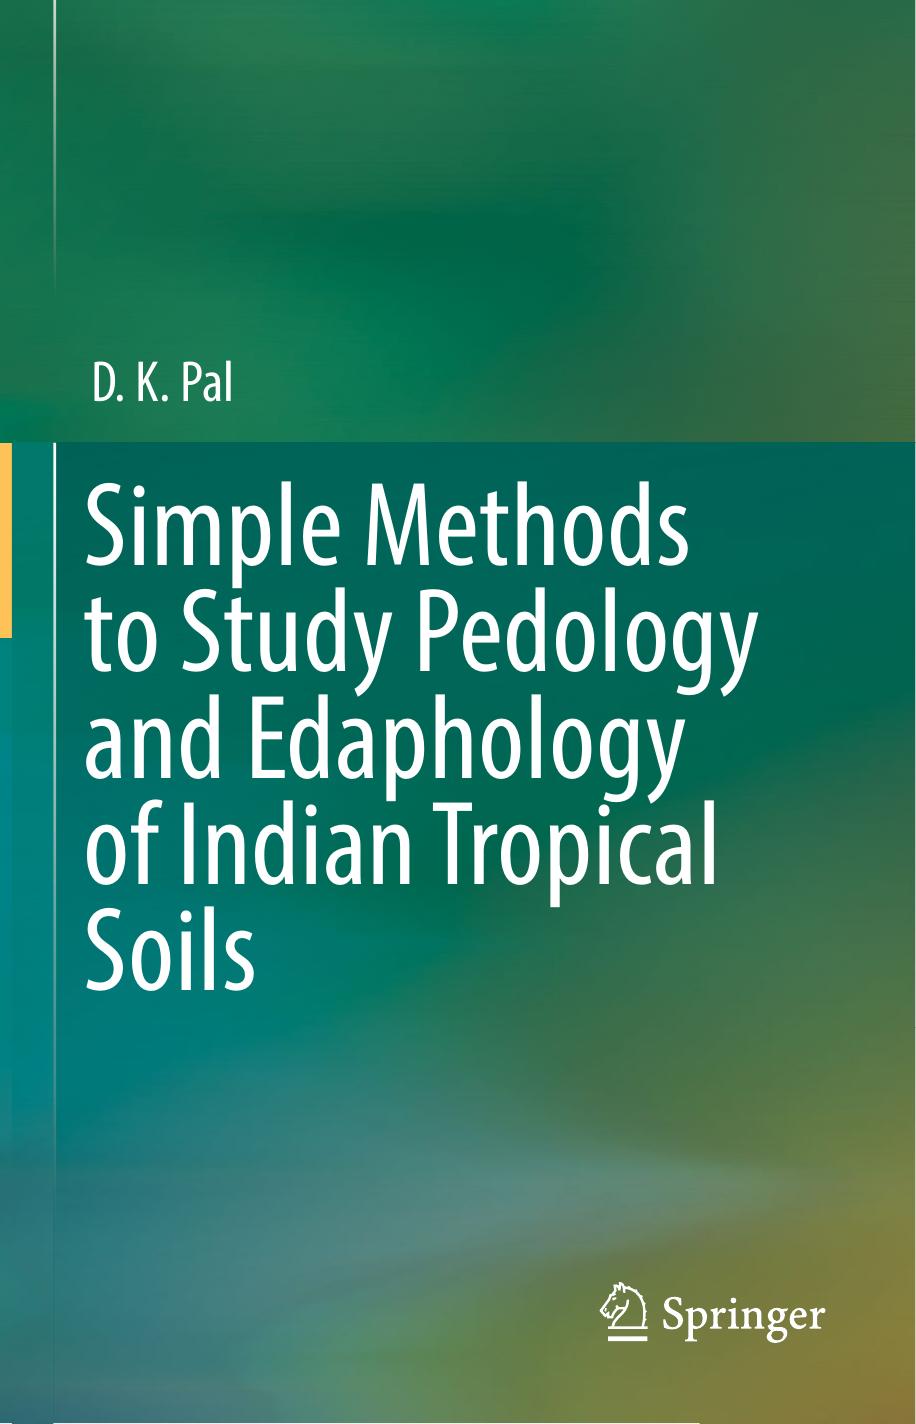 Simple Methods to Study Pedology and Edaphology of Indian Tropical Soils ( PDFDrive ), 2019